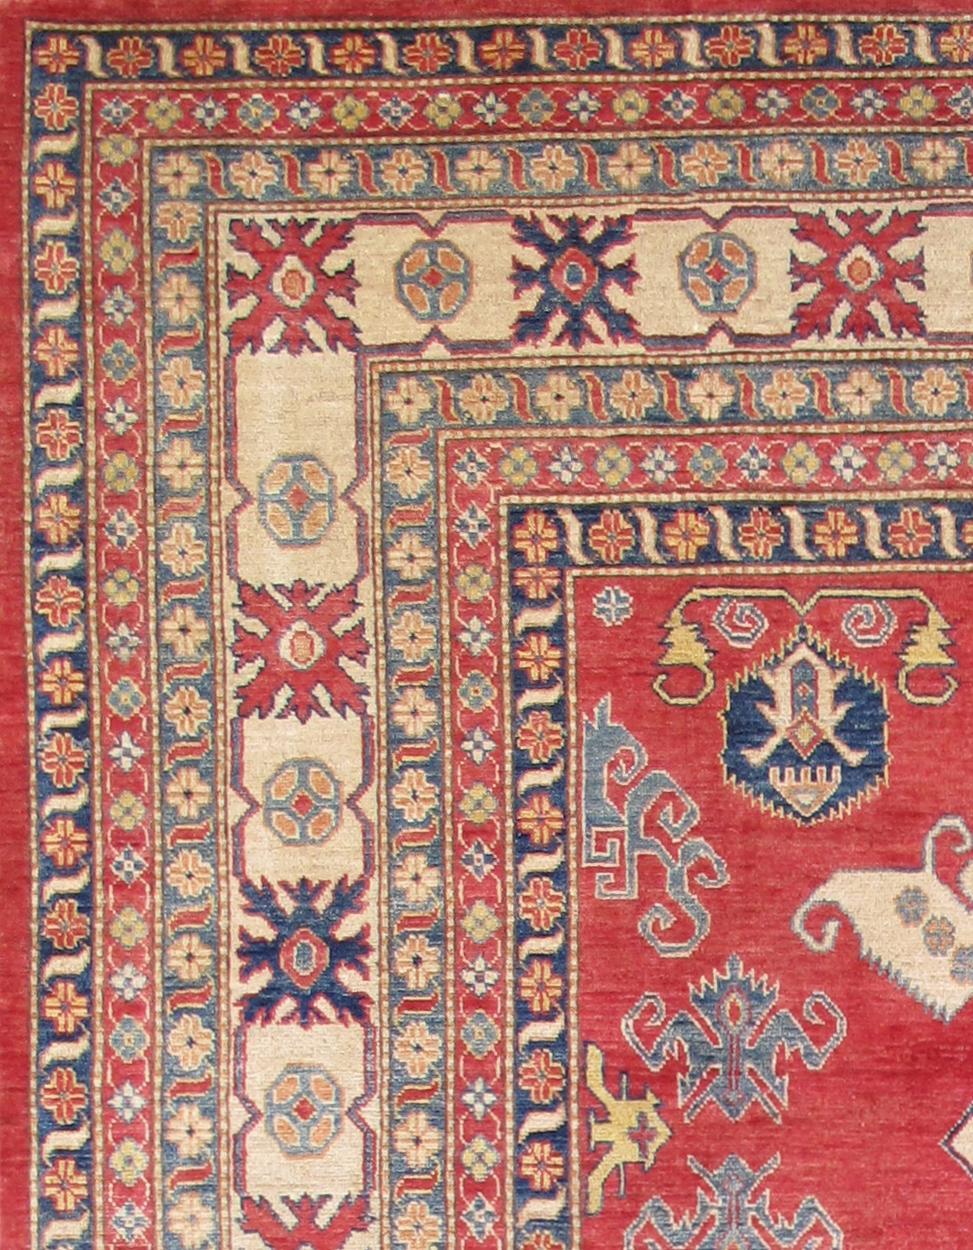 Pasargad's Kazak Collection is inspired by antique Caucasian rugs that are made by villages and tribes of Afghanistan. Made of hand-spun, hand-shredded high mountain lamb's wool with all natural vegetable dyes in Afghanistan, these rugs embody a